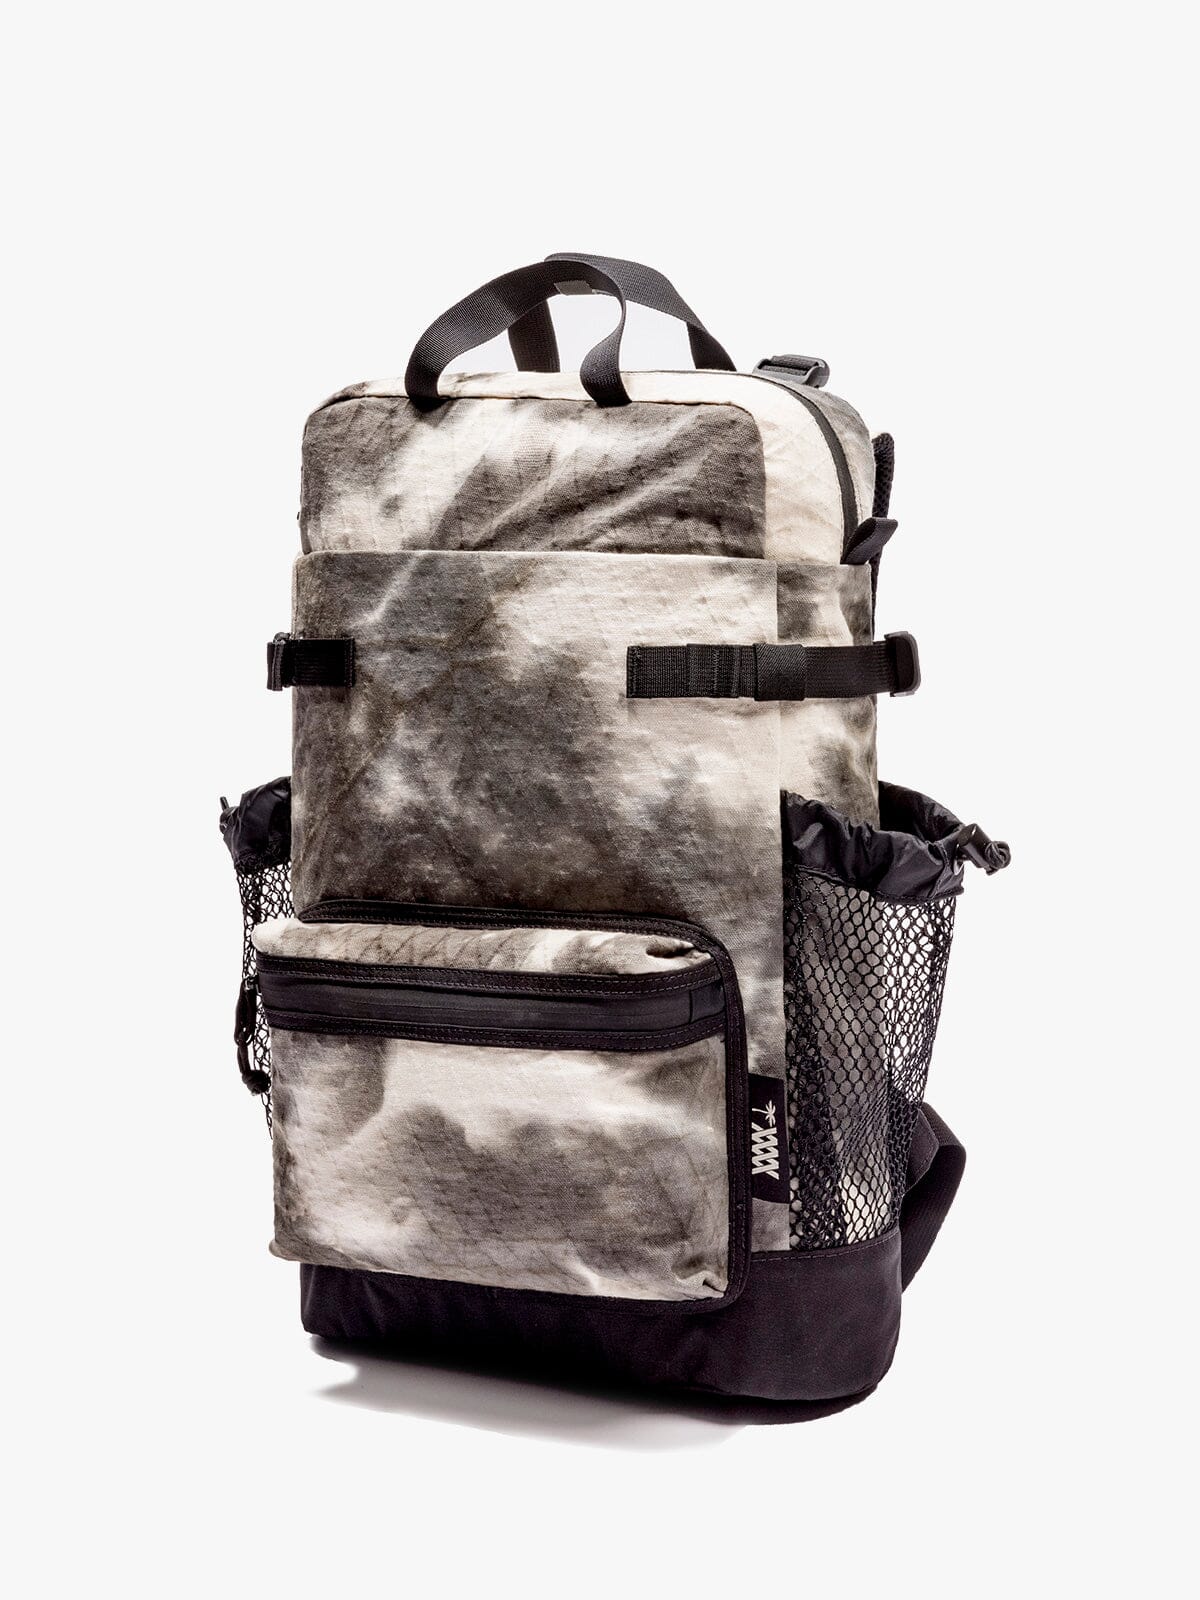 MW x ASP Stratus Ruck by Mission Workshop - Weatherproof Bags & Technical Apparel - San Francisco & Los Angeles - Built to endure - Guaranteed forever